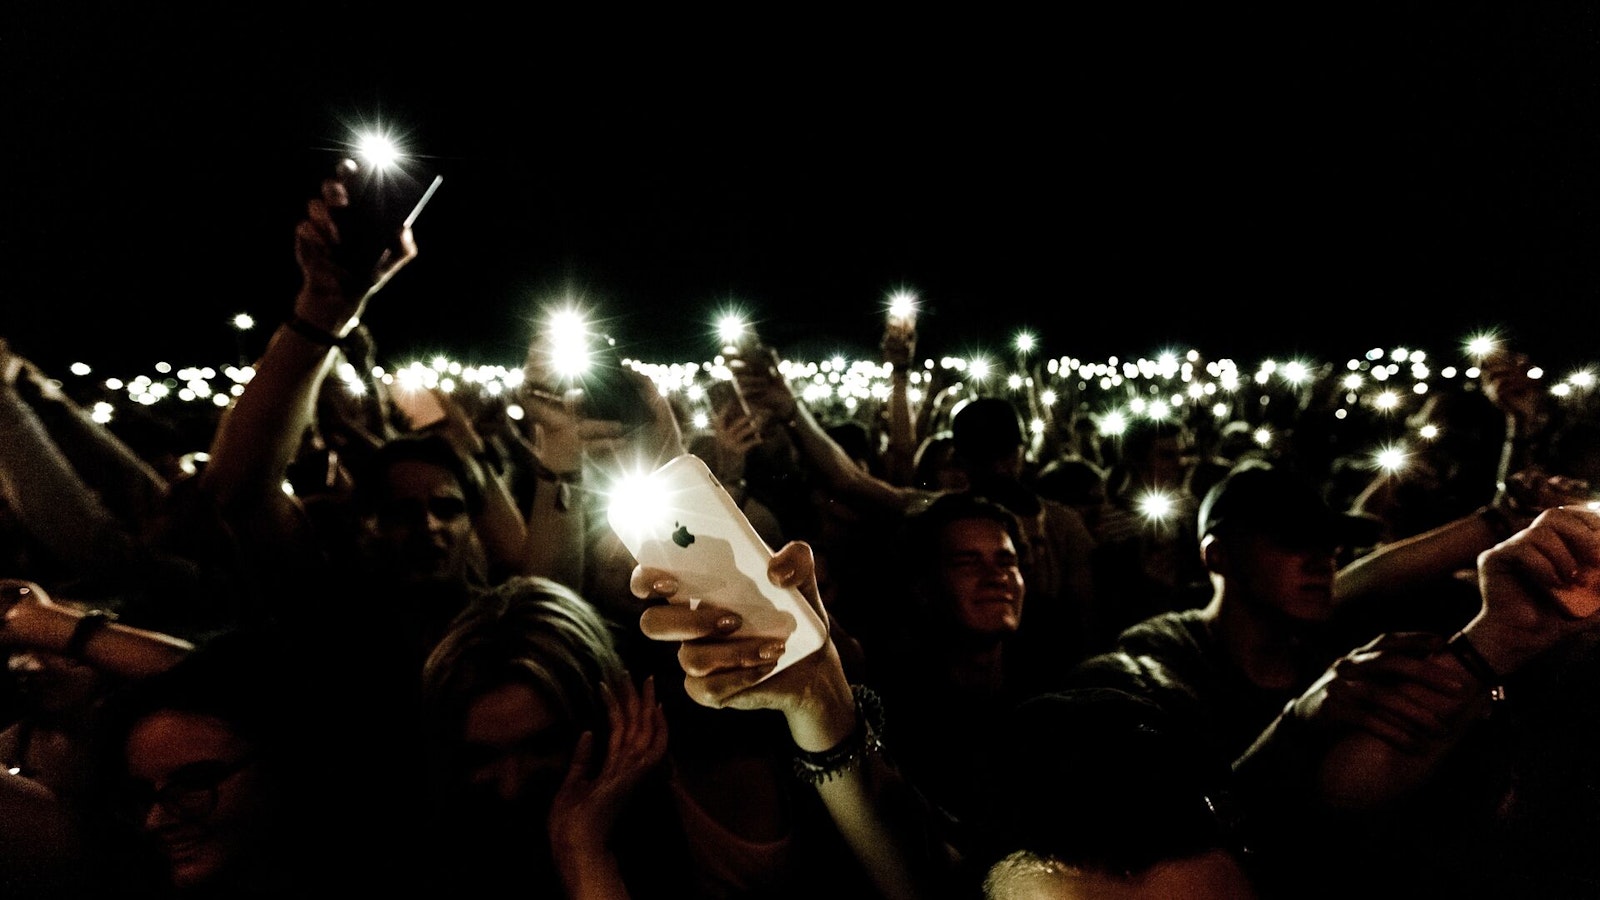 People-Lighting-Up-With-Their-Phone-Torch